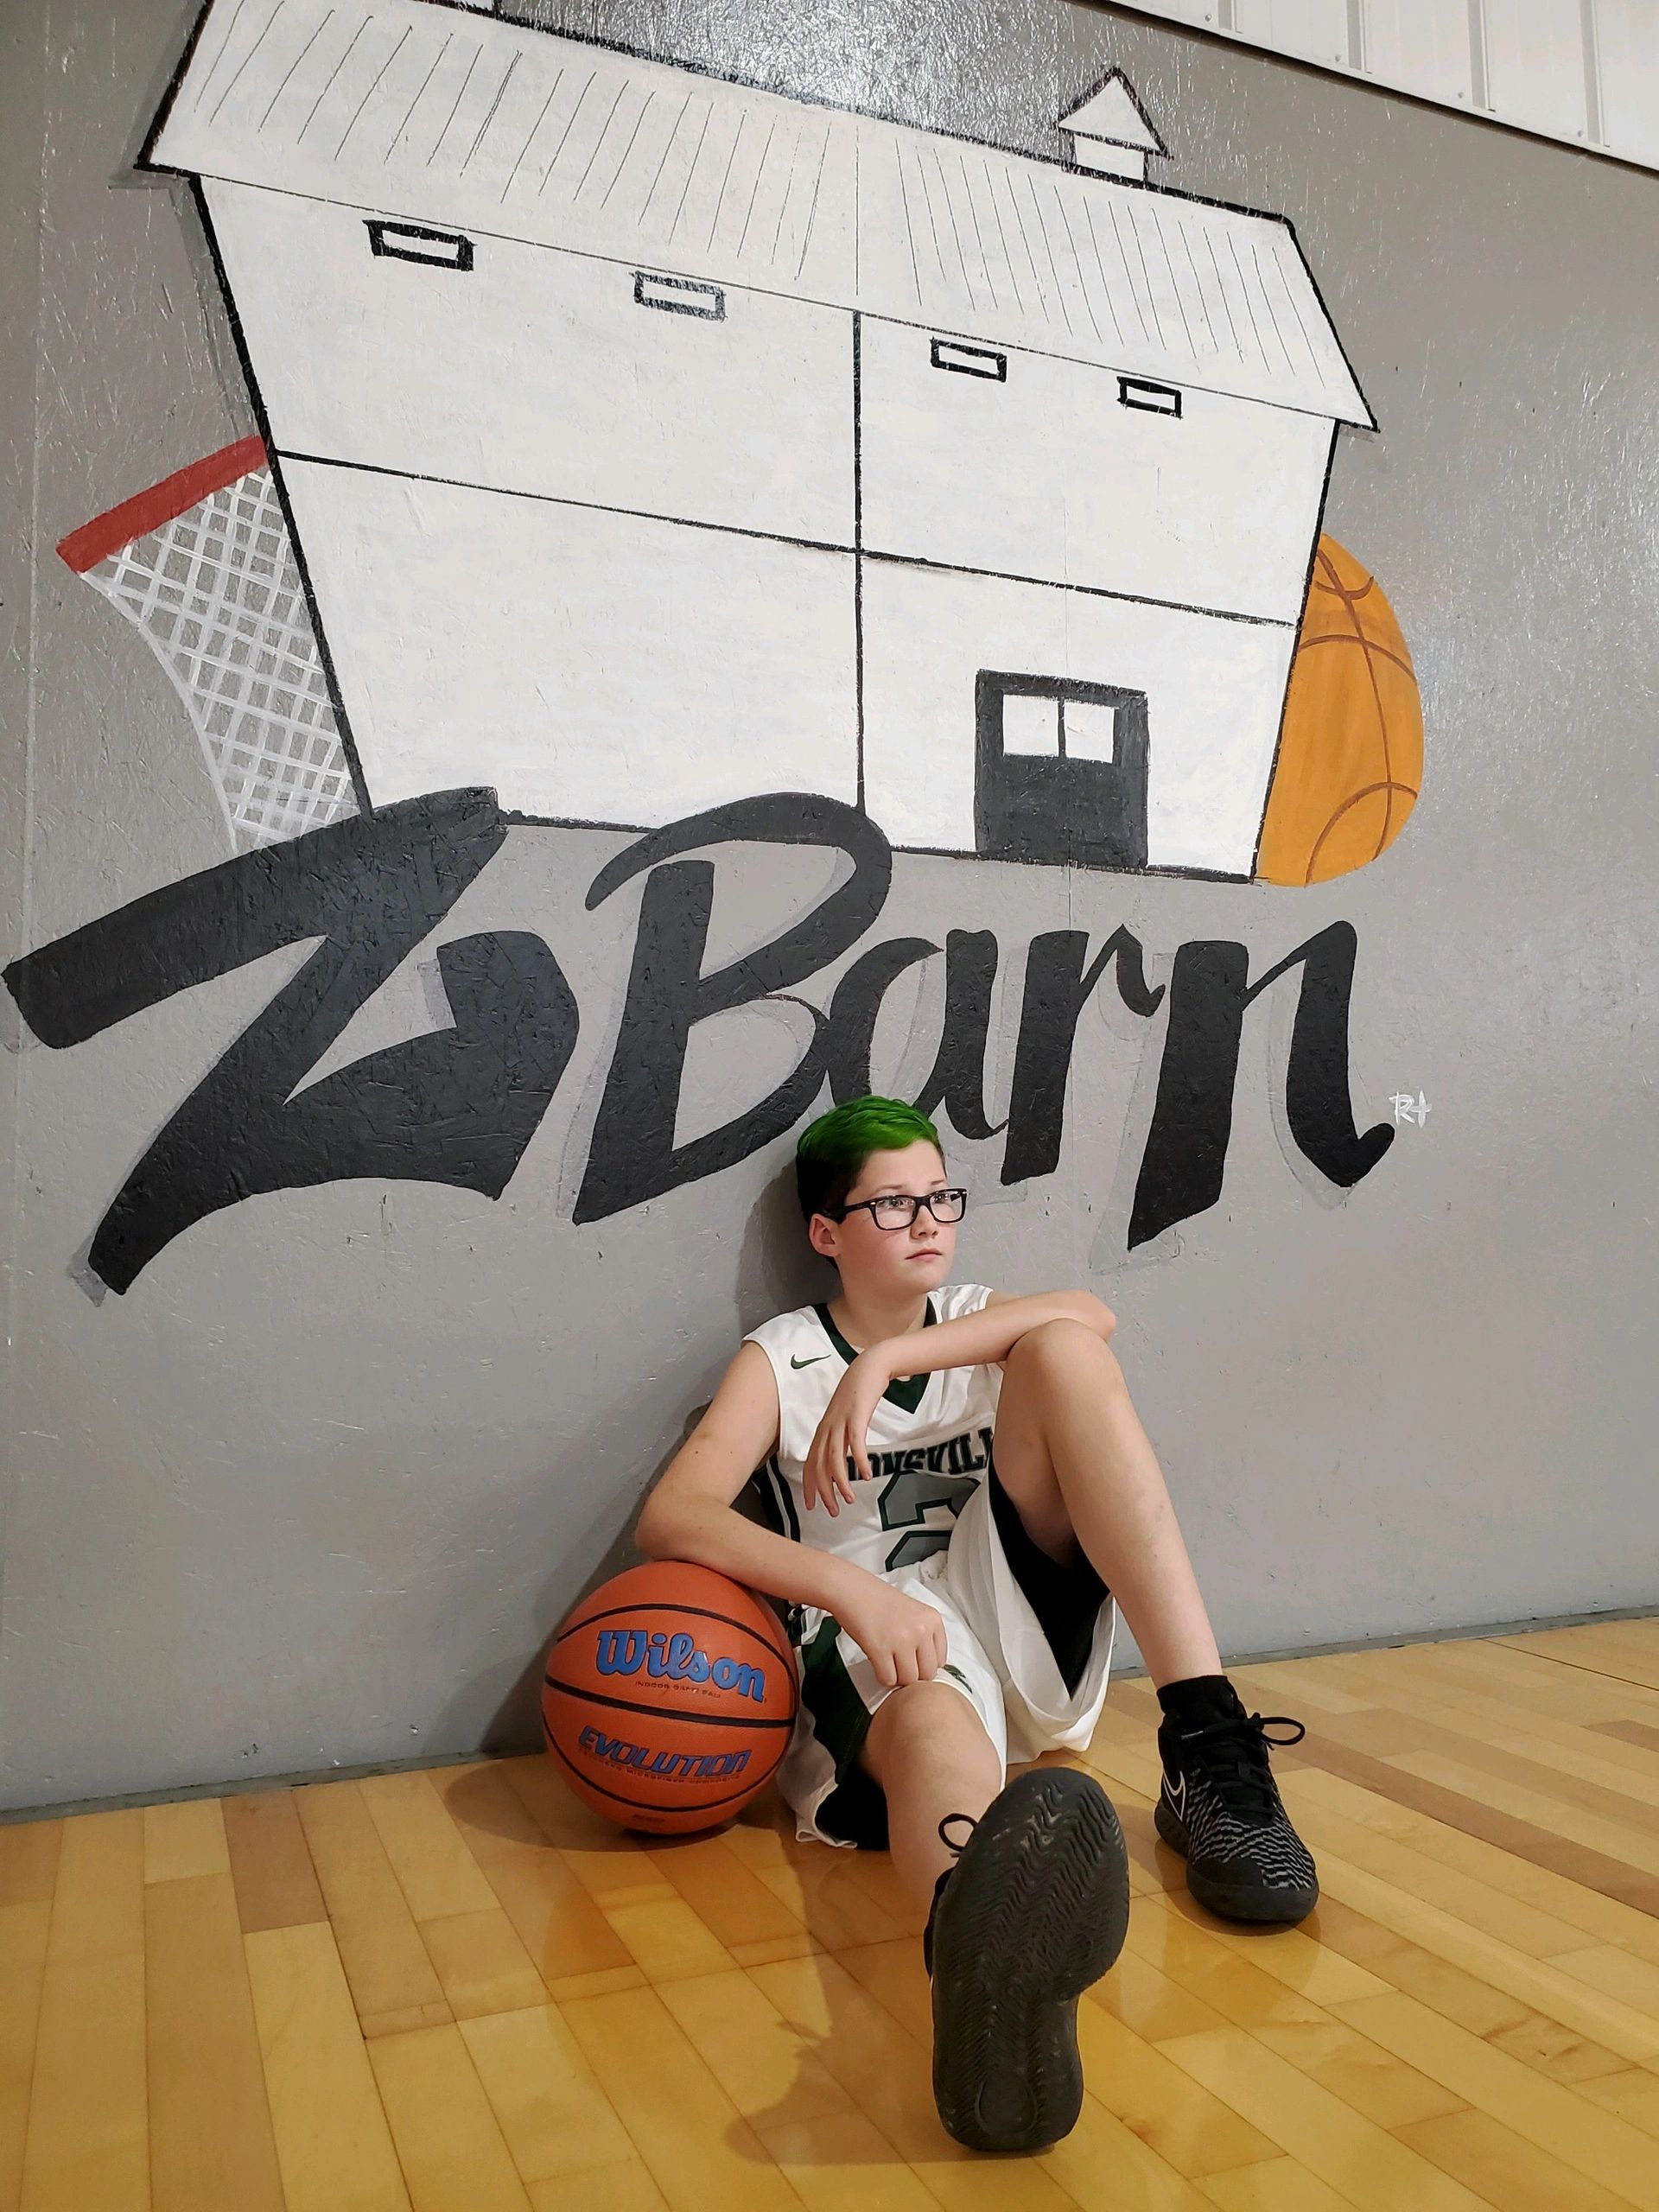 ZBARN basketball barn in Zionsville Indiana

Basketball training for your elite player.

  

